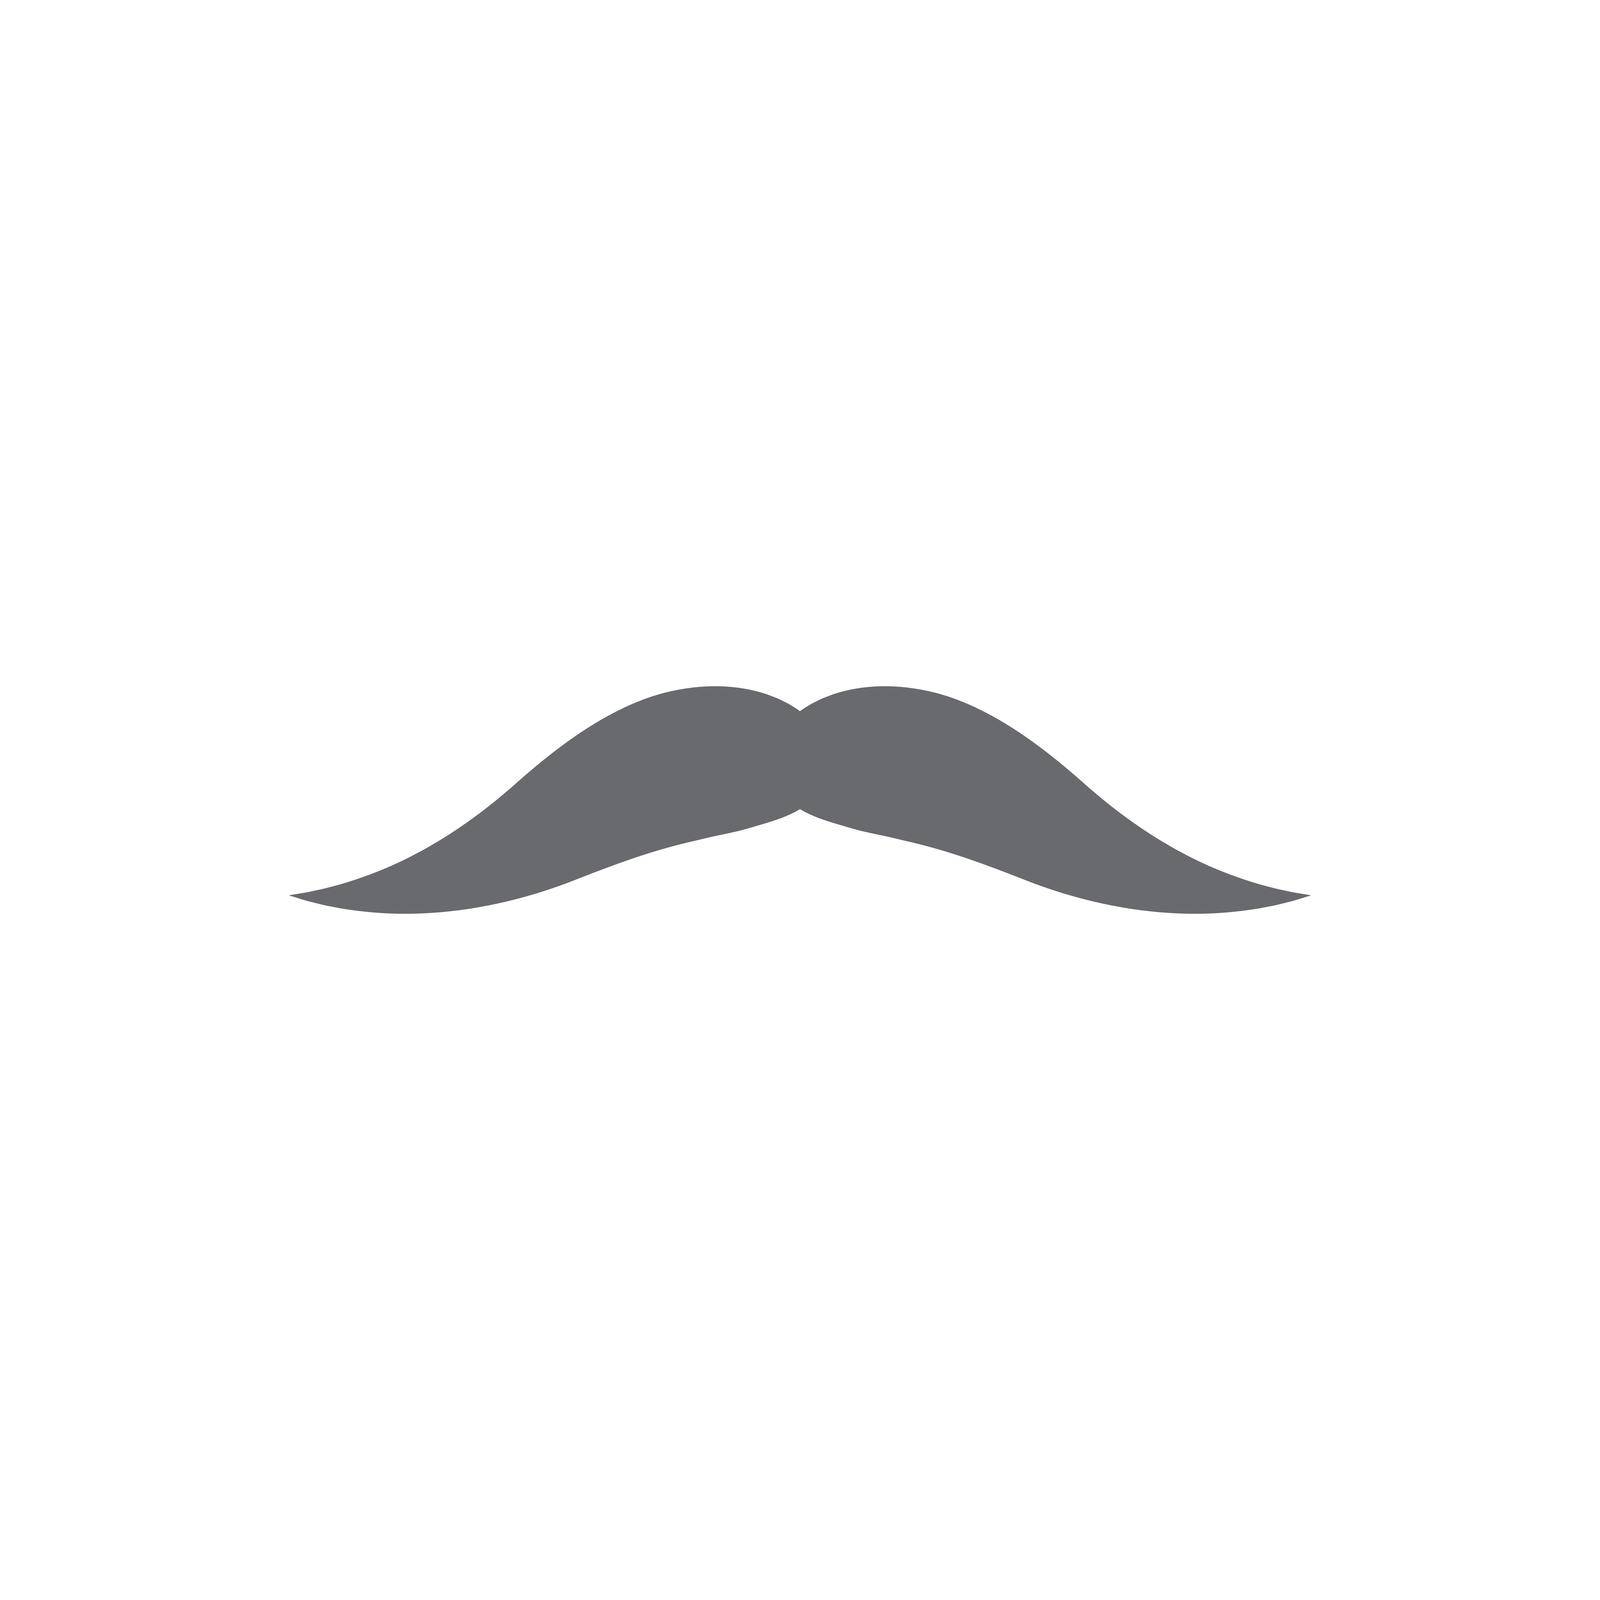 Mustache icon by awk